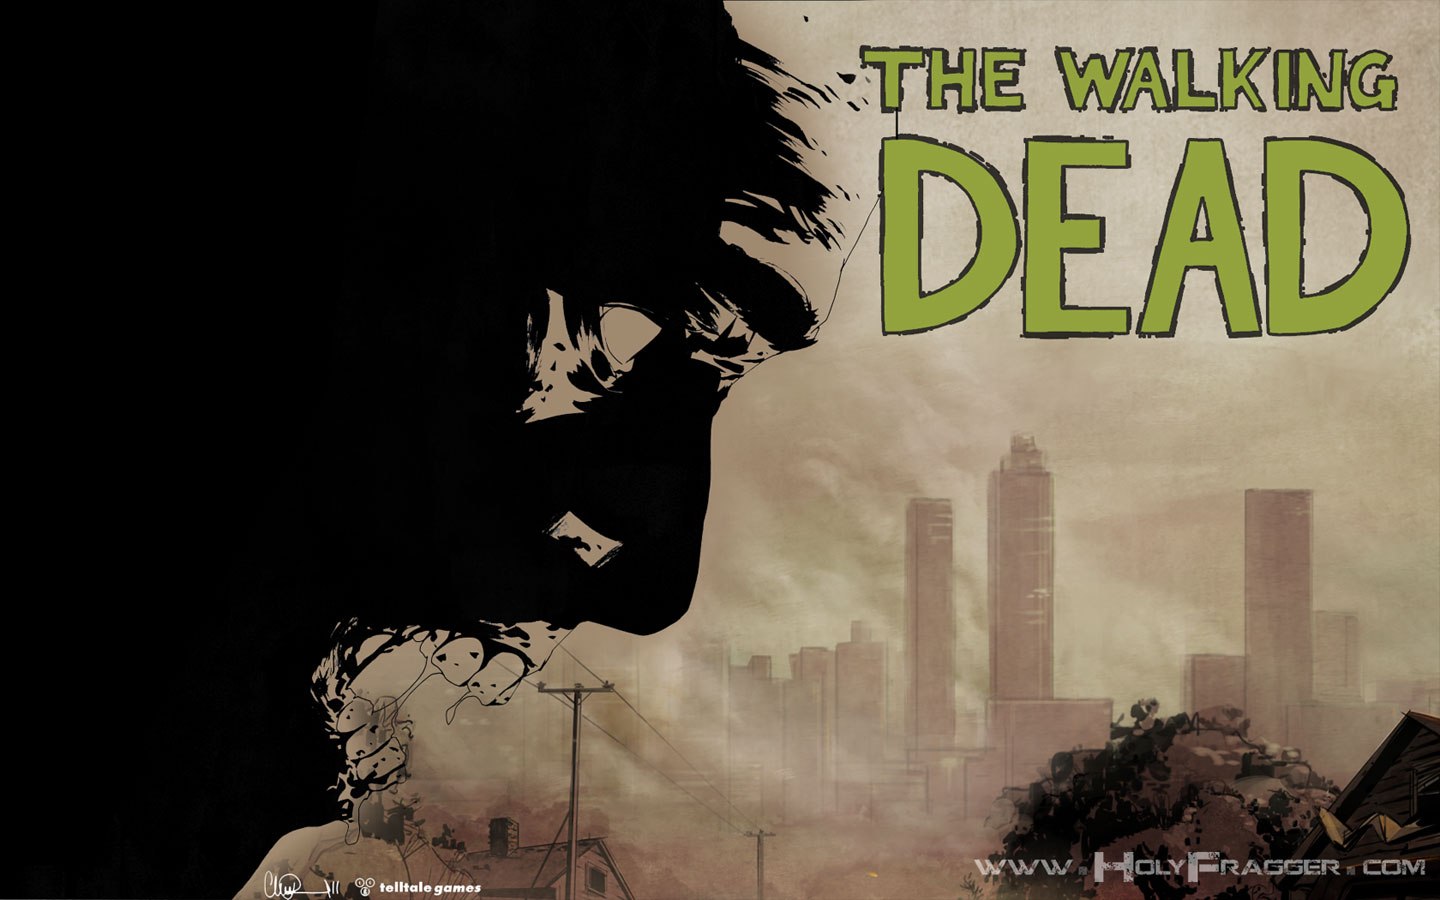 The walking dead video game wallpaper - (#28020) - High Quality ...